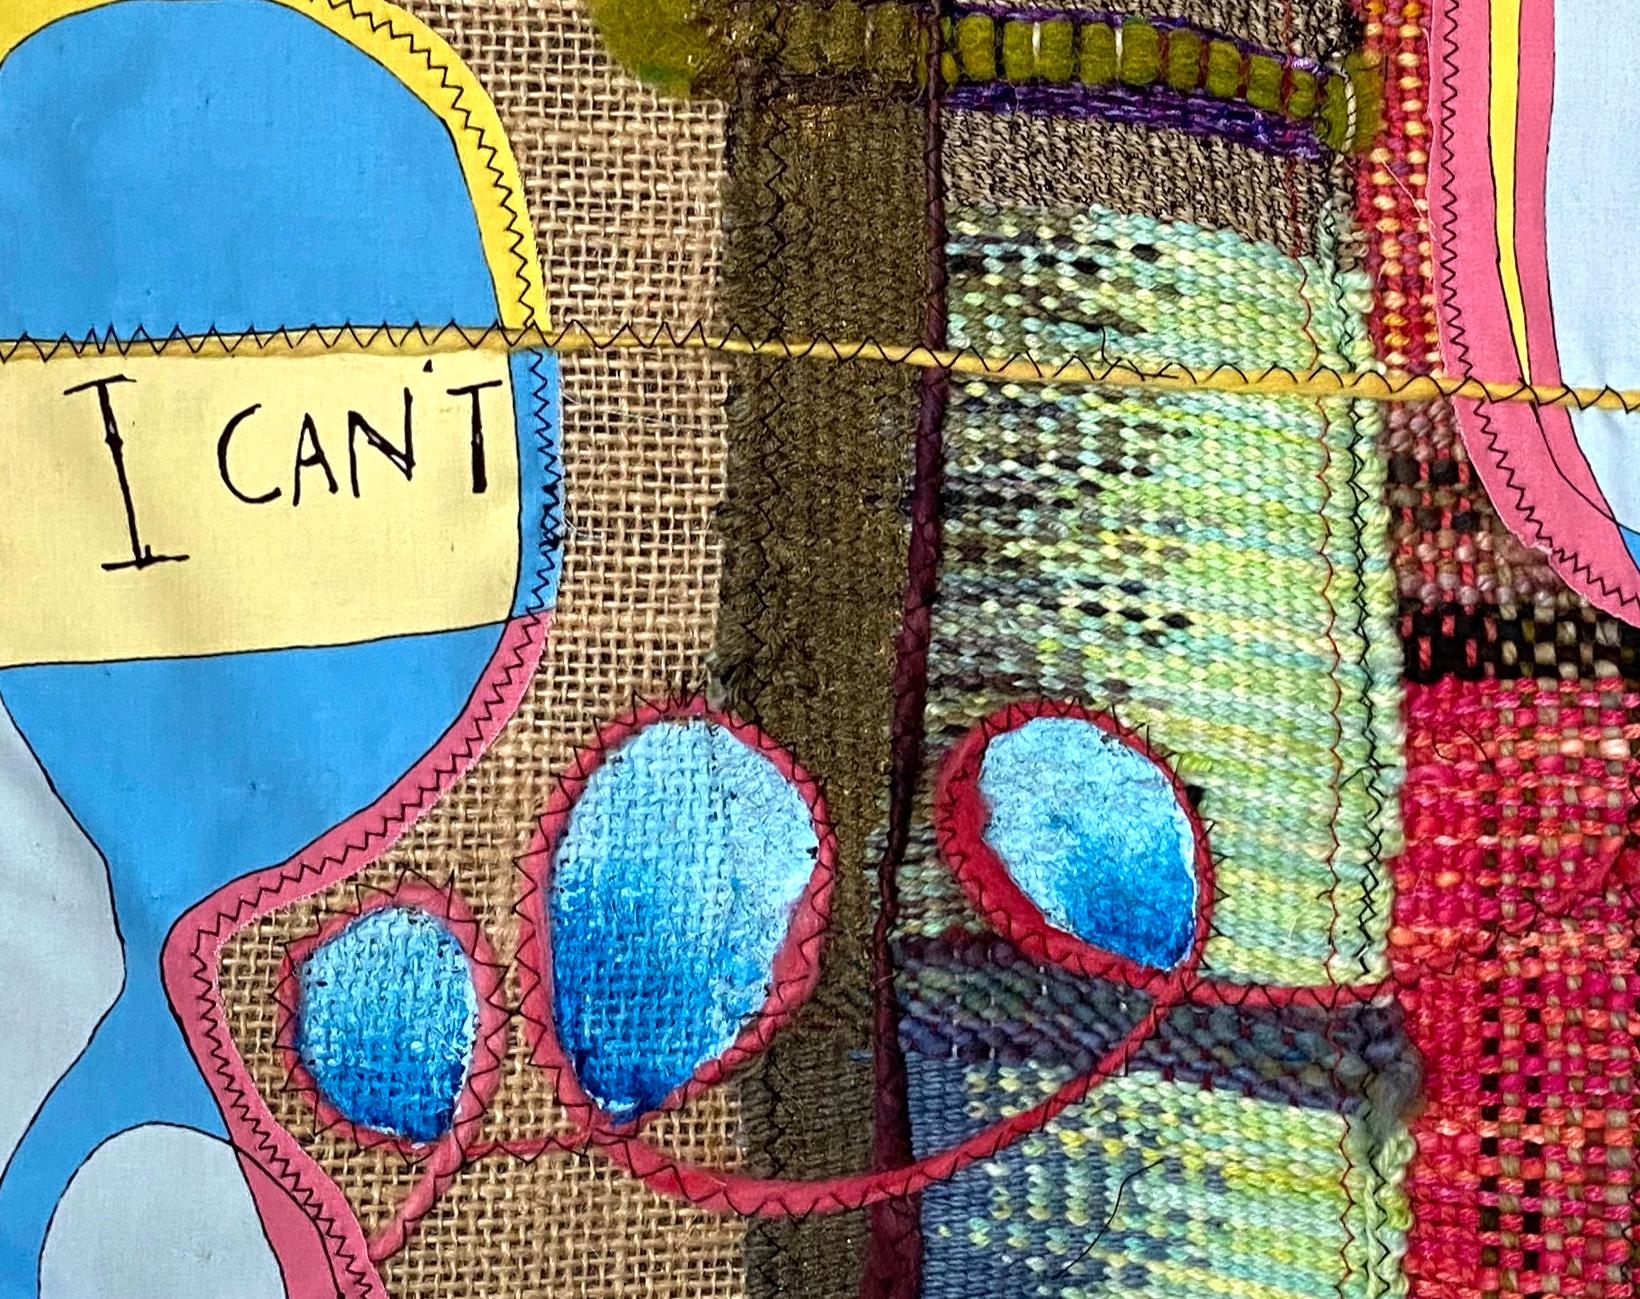 Handwoven textile wall hanging: 'I Can't' - Painting by Juliet Martin